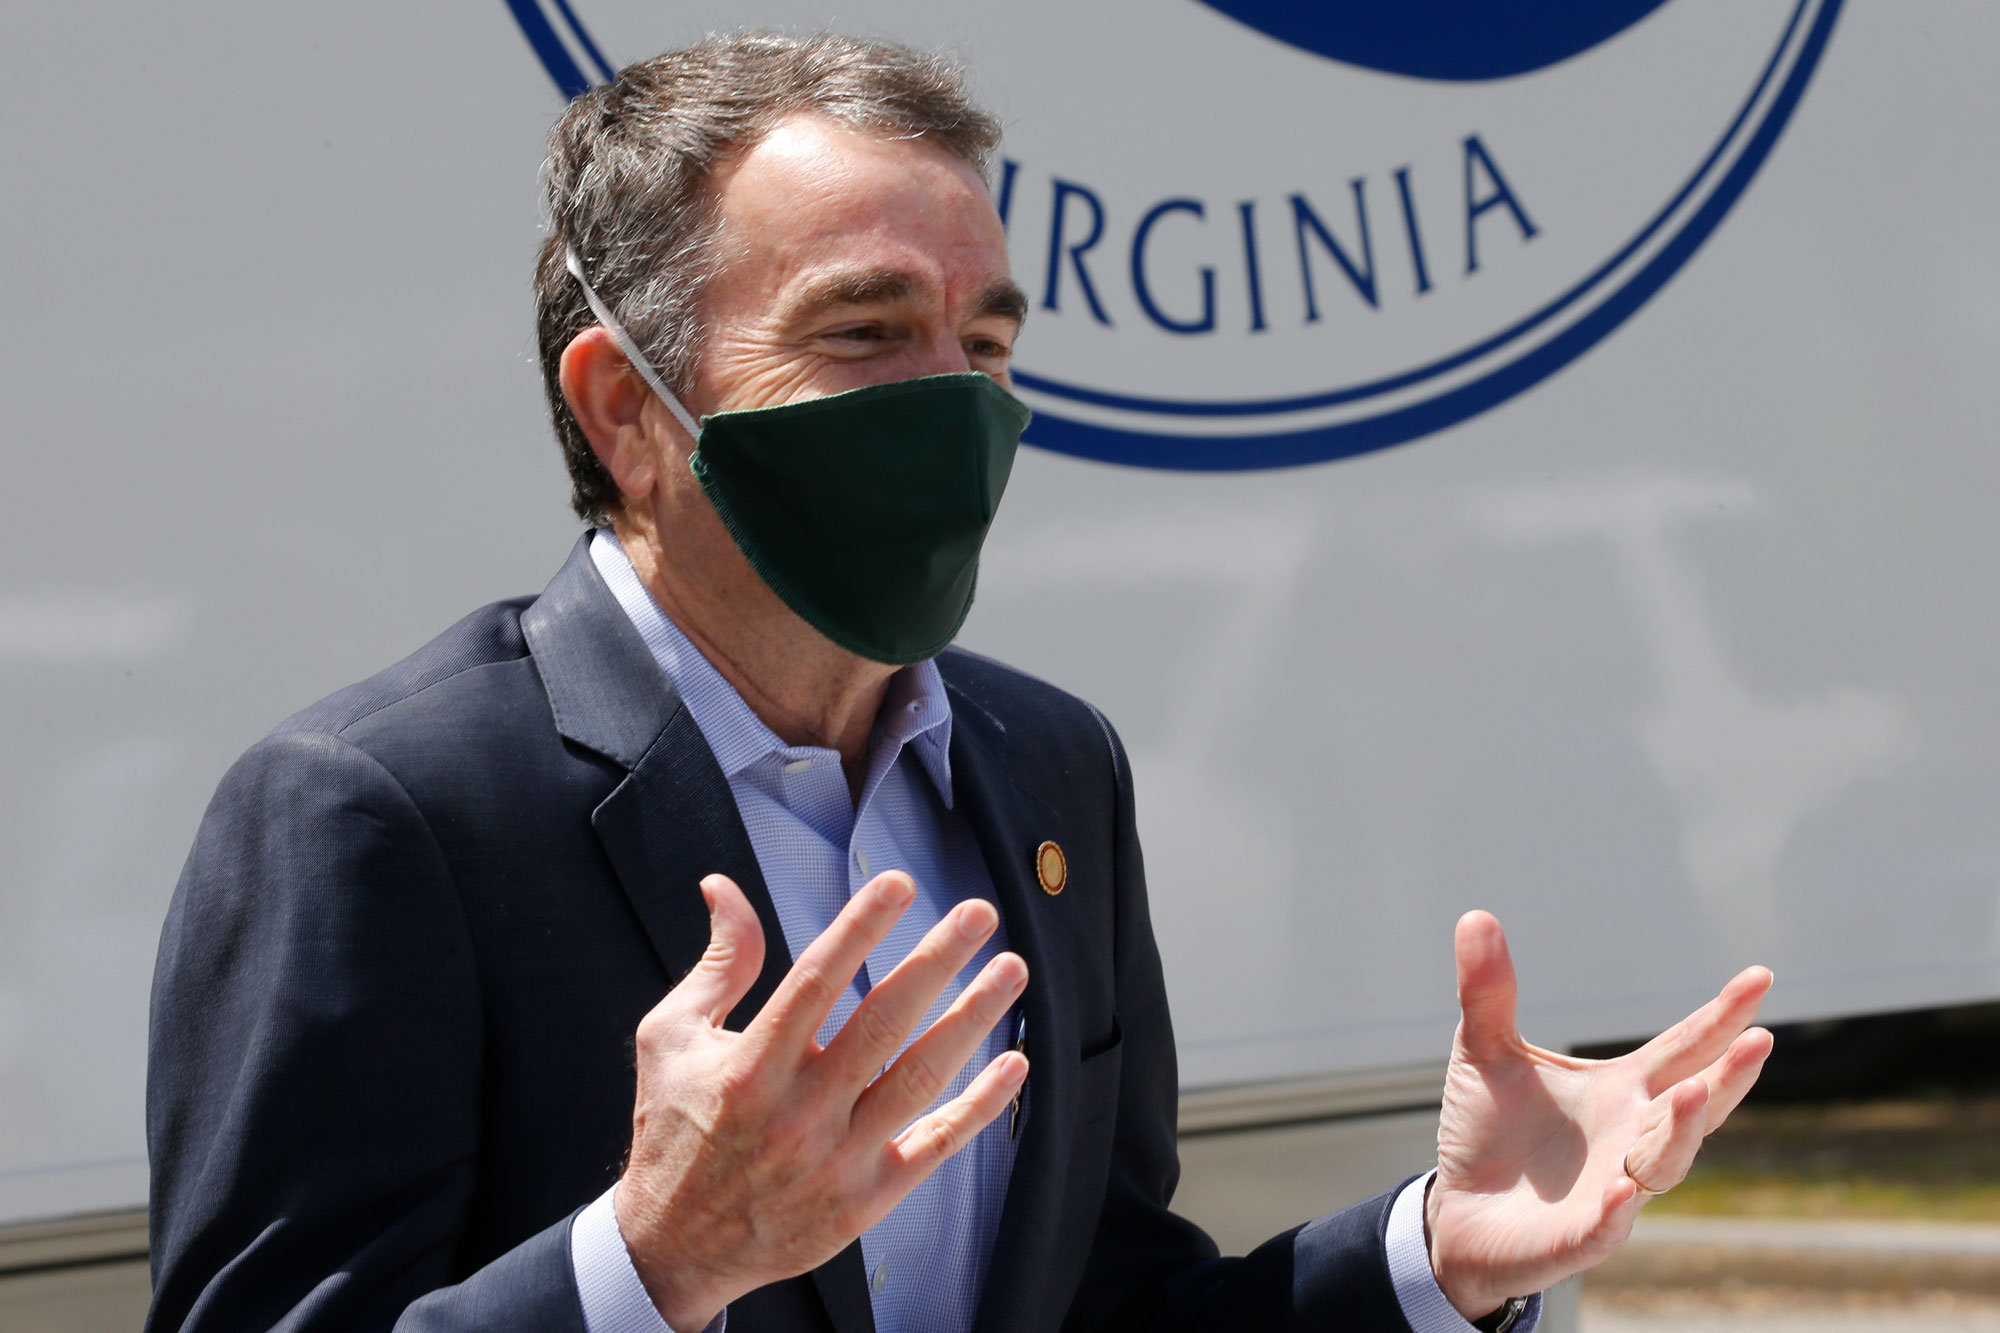 Virginia Gov. Ralph Northam gestures as he speaks to a group of volunteers to distribute supplies at health equity community event on May 12 in Richmond, Virginia.